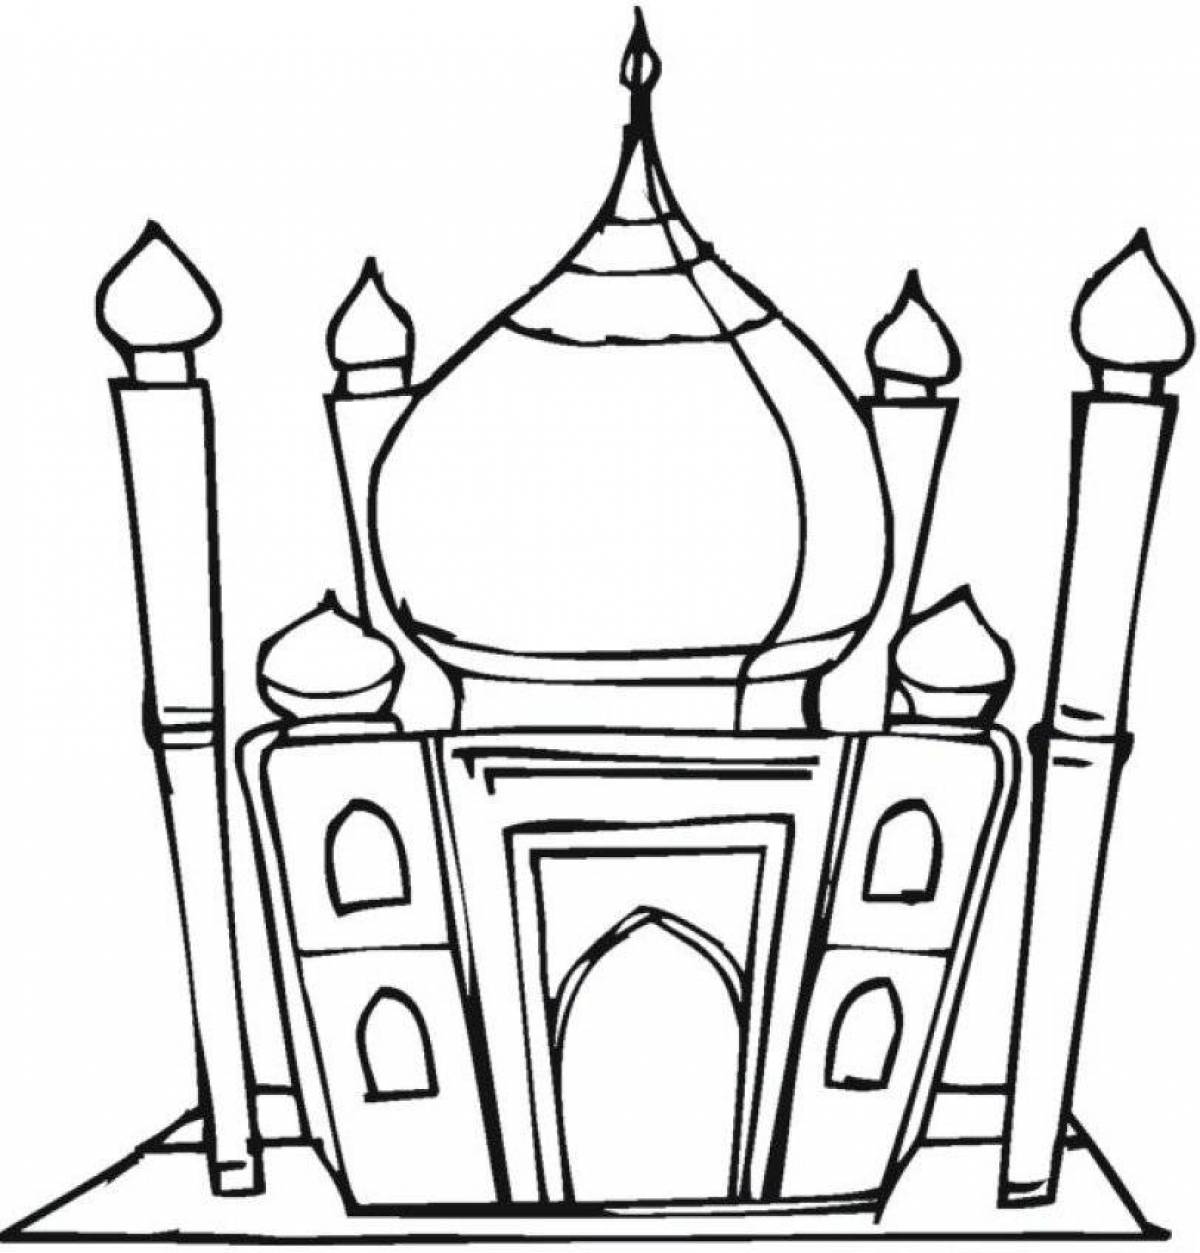 Exquisite mosque coloring page